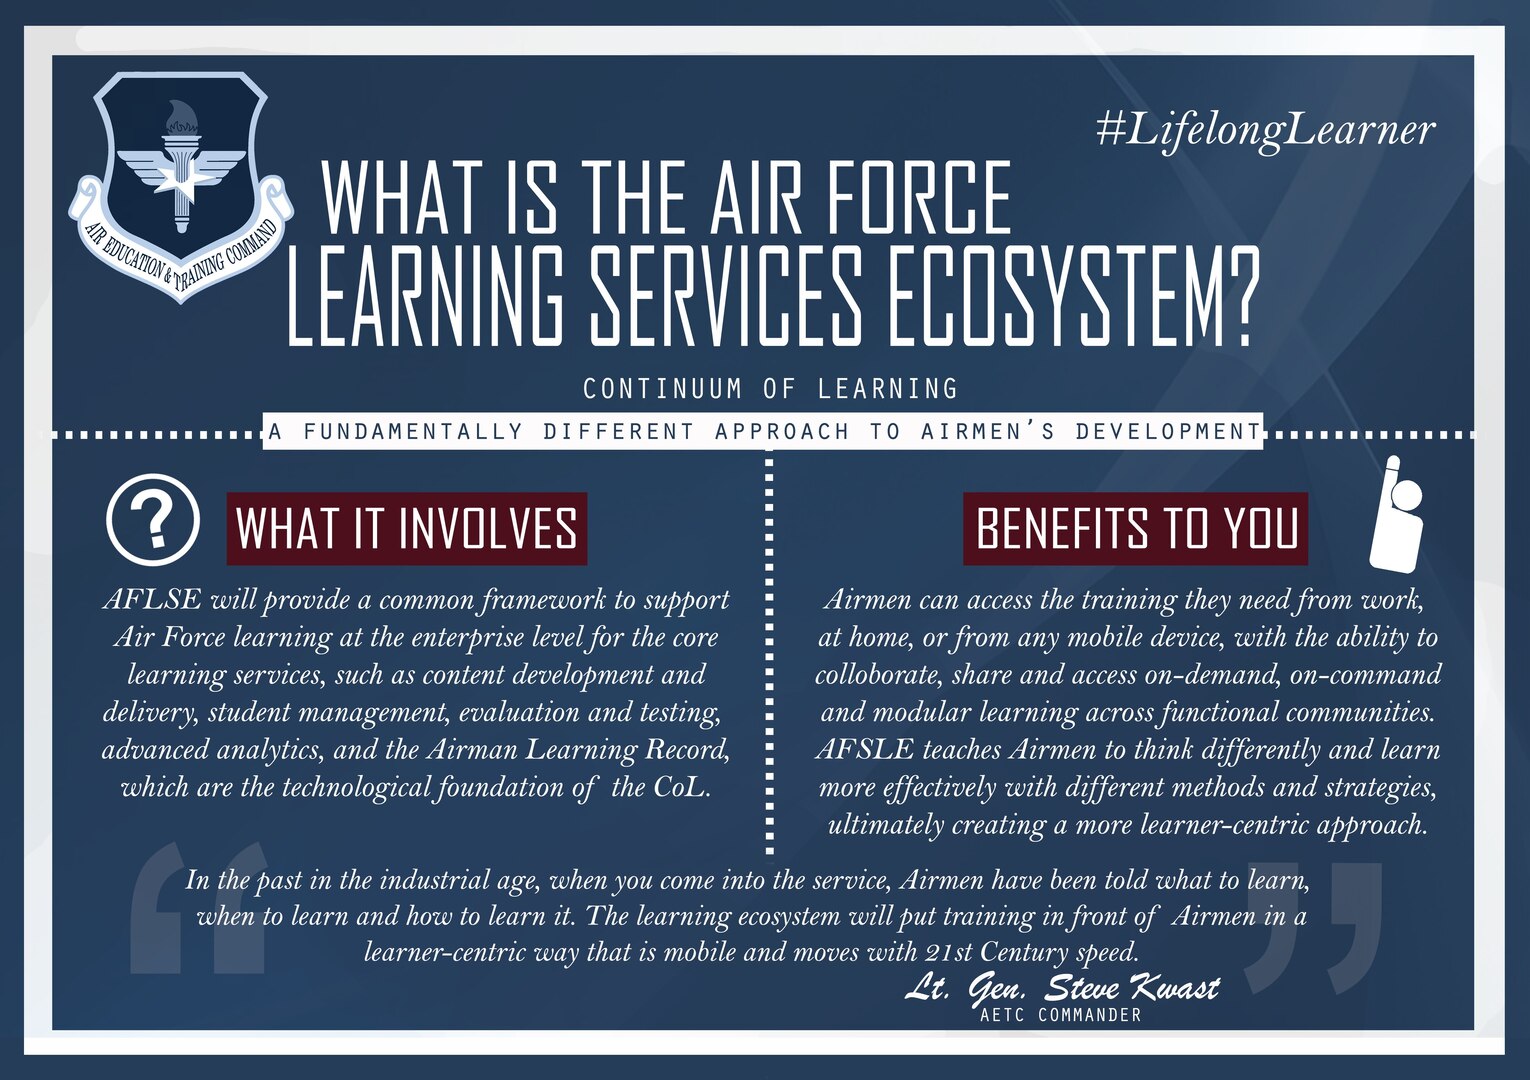 Air Education and Training Command officials announced the service’s new cloud-based learning ecosystem is currently in a beta test with four courses, with testing expected to complete in the summer of 2019 and full operational capability expected in early 2020.